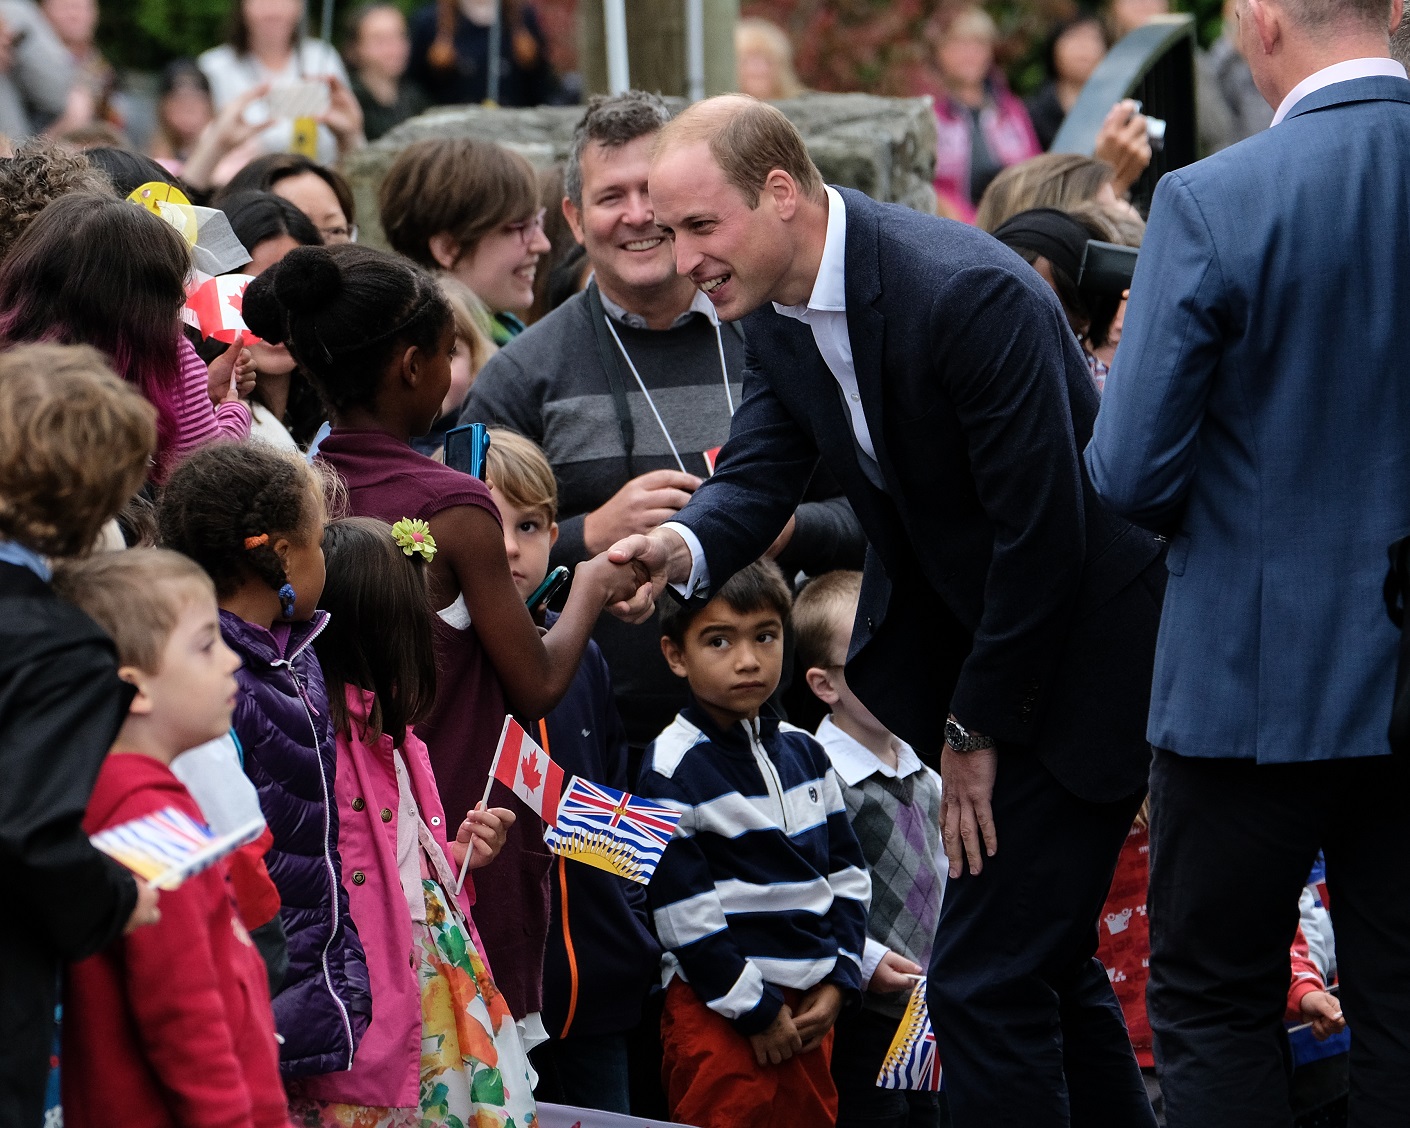 Prince William talking to members of the public at the Cridge Centre for the Family, Victoria